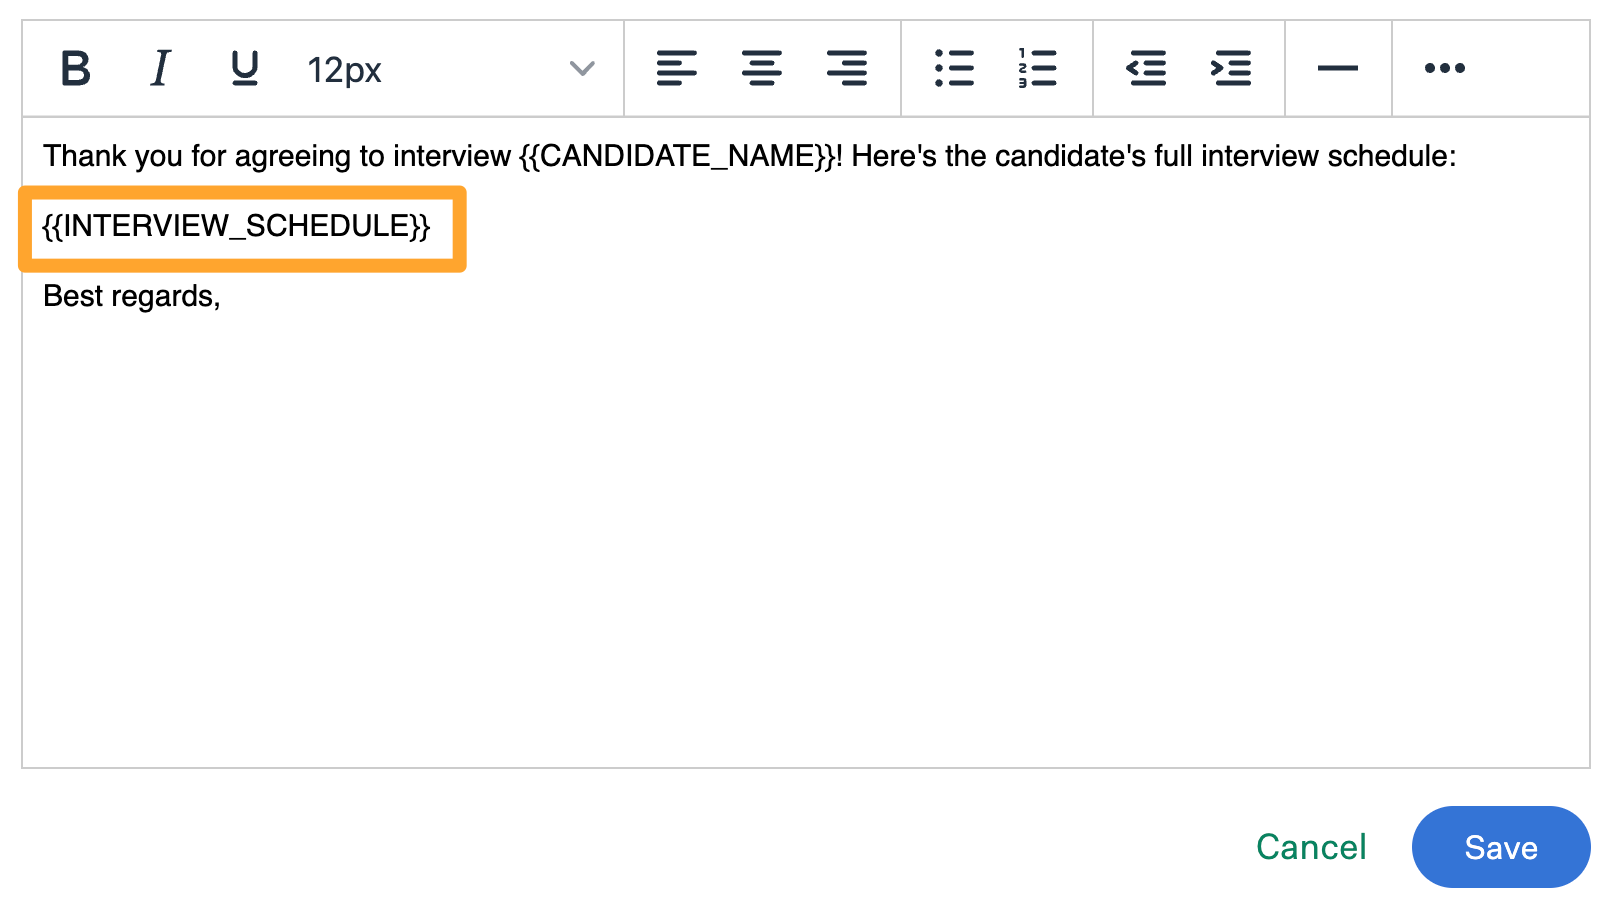 Body of the email template with some sample text included. An orange box is highlighting the token {{INTERVIEW_SCHEDULE}}